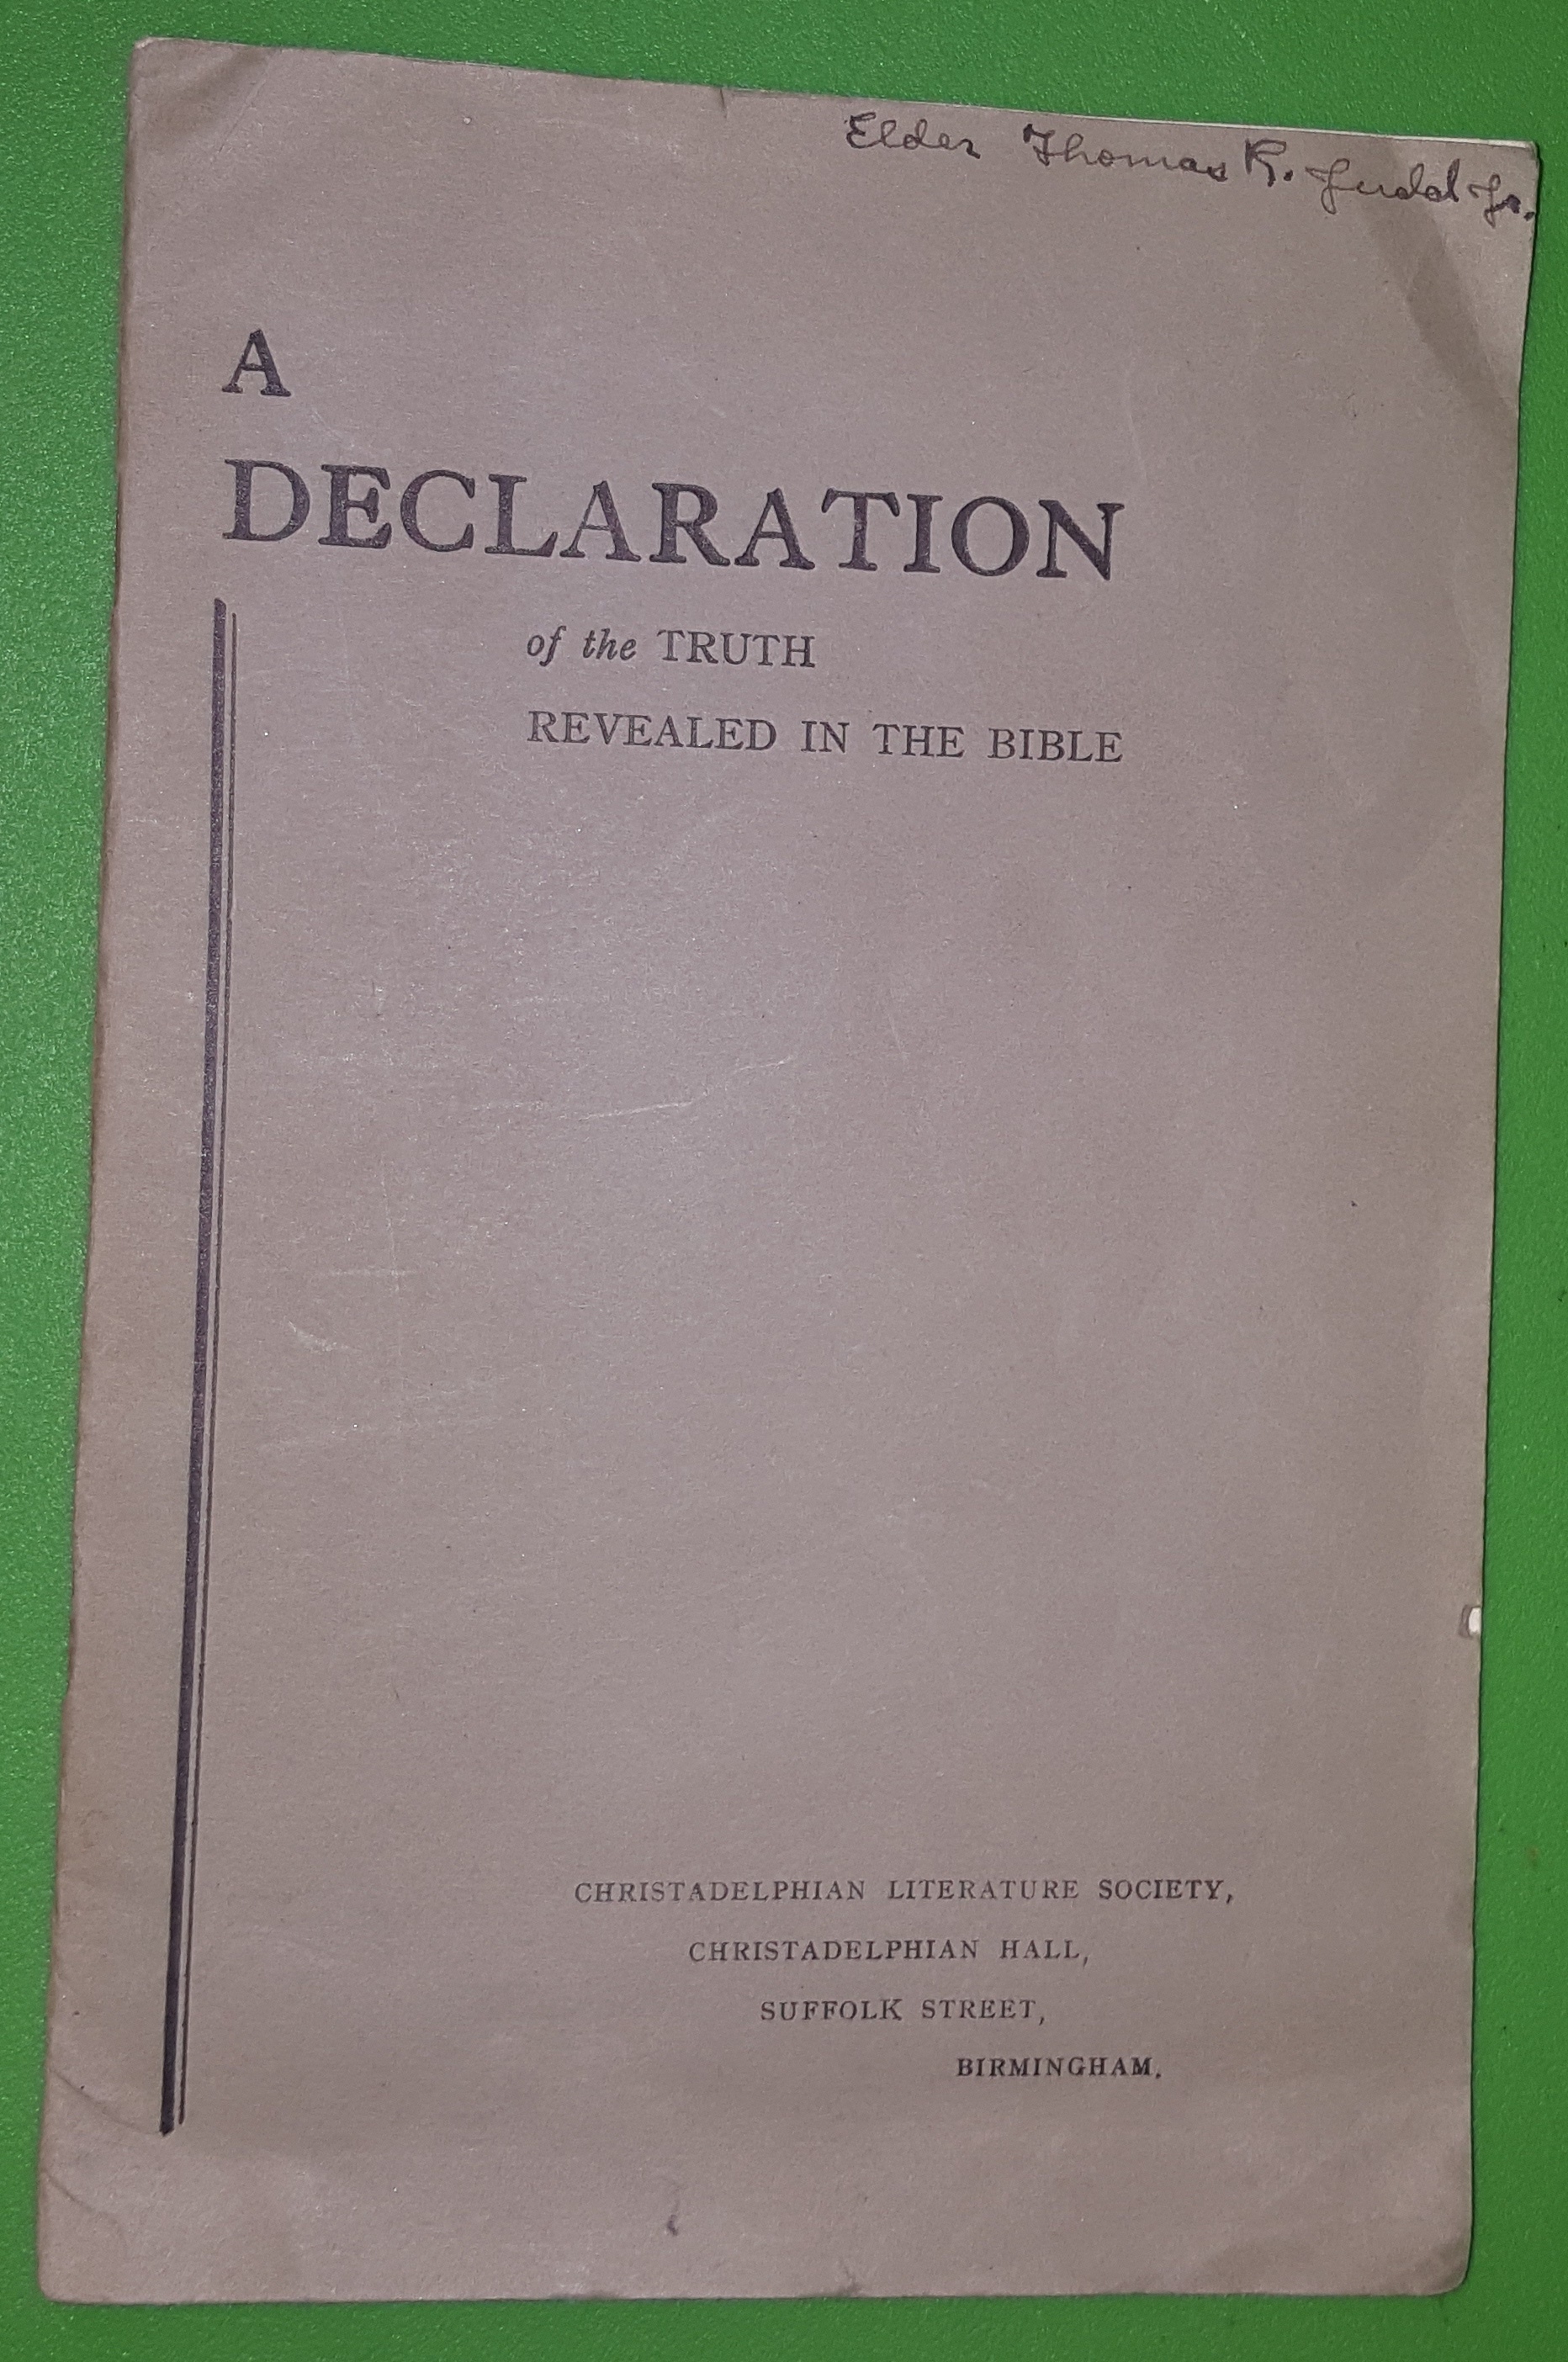 Image for A DECLARATION OF THE TRUTH REVEALED IN THE BIBLE AS DISTINGUISHABLE FROM THE THEOLOGY OF CHRISTENDOM -  SET FORTH IN A SERIES OF PROPOSITIONS, ARRANGED FOR THE PURPOSE OF EXHIBITING THE FAITH PROMULGATED BY THE APOSTLES IN THE FIRST CENTURY